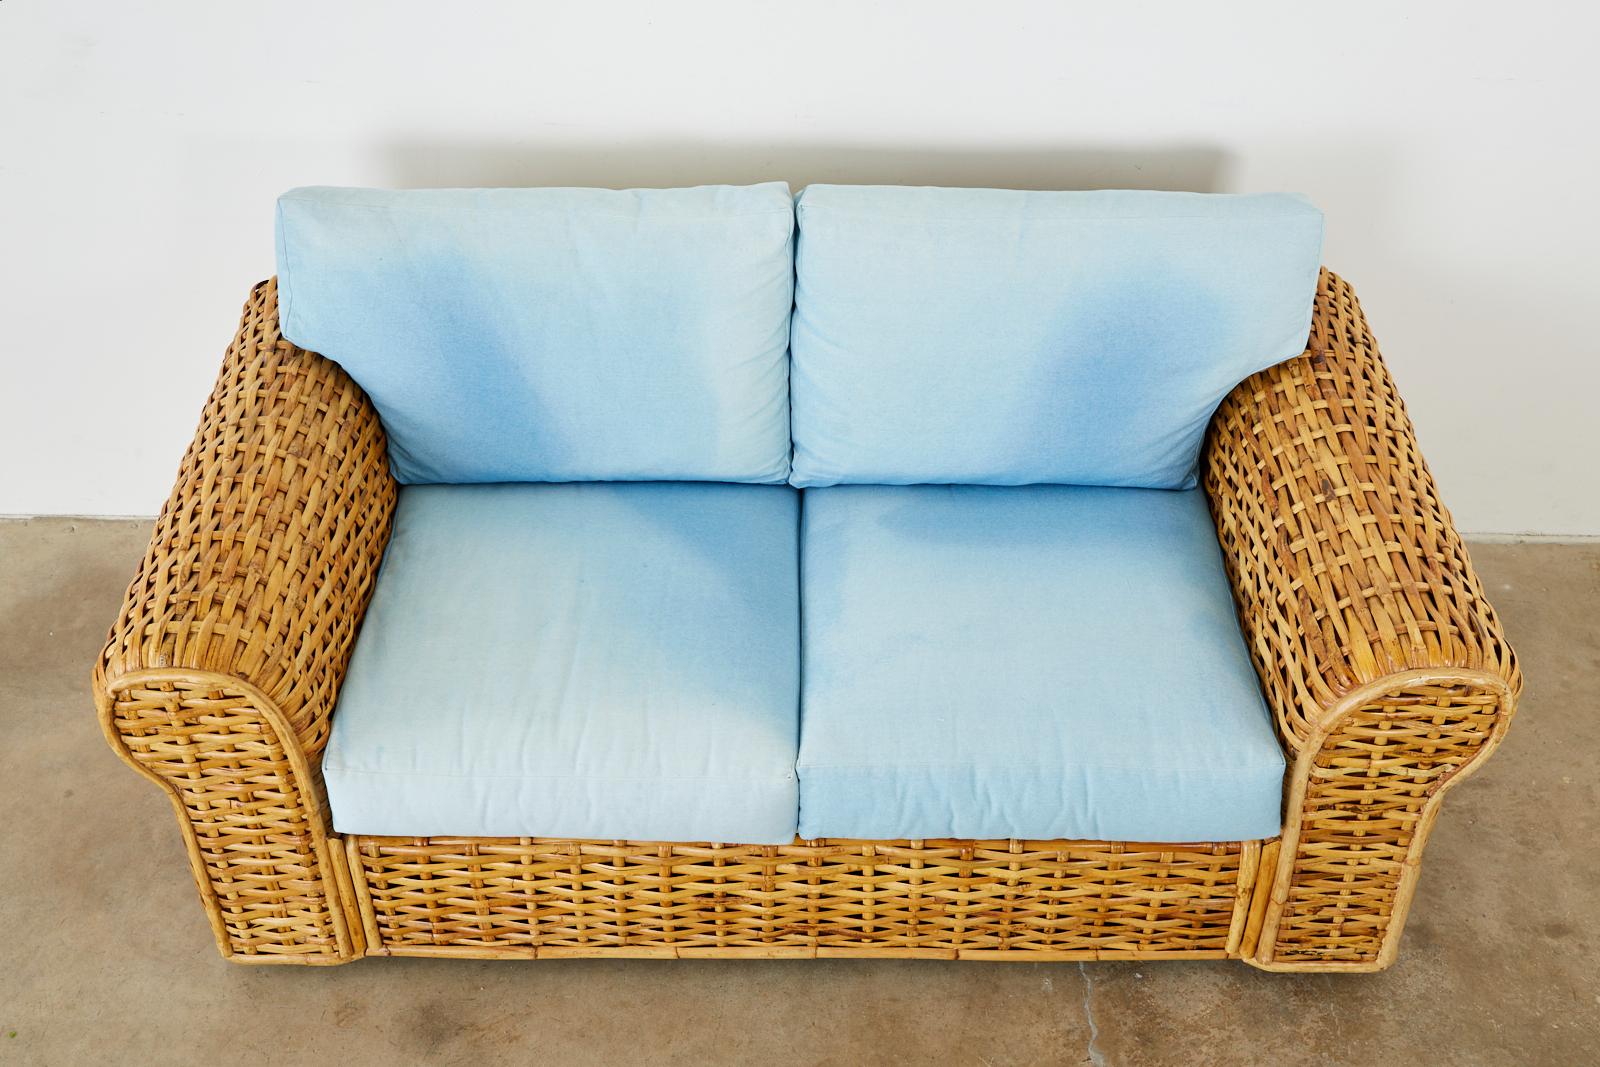 American Ralph Lauren Woven Rattan Settee with Blue Ombre Upholstery